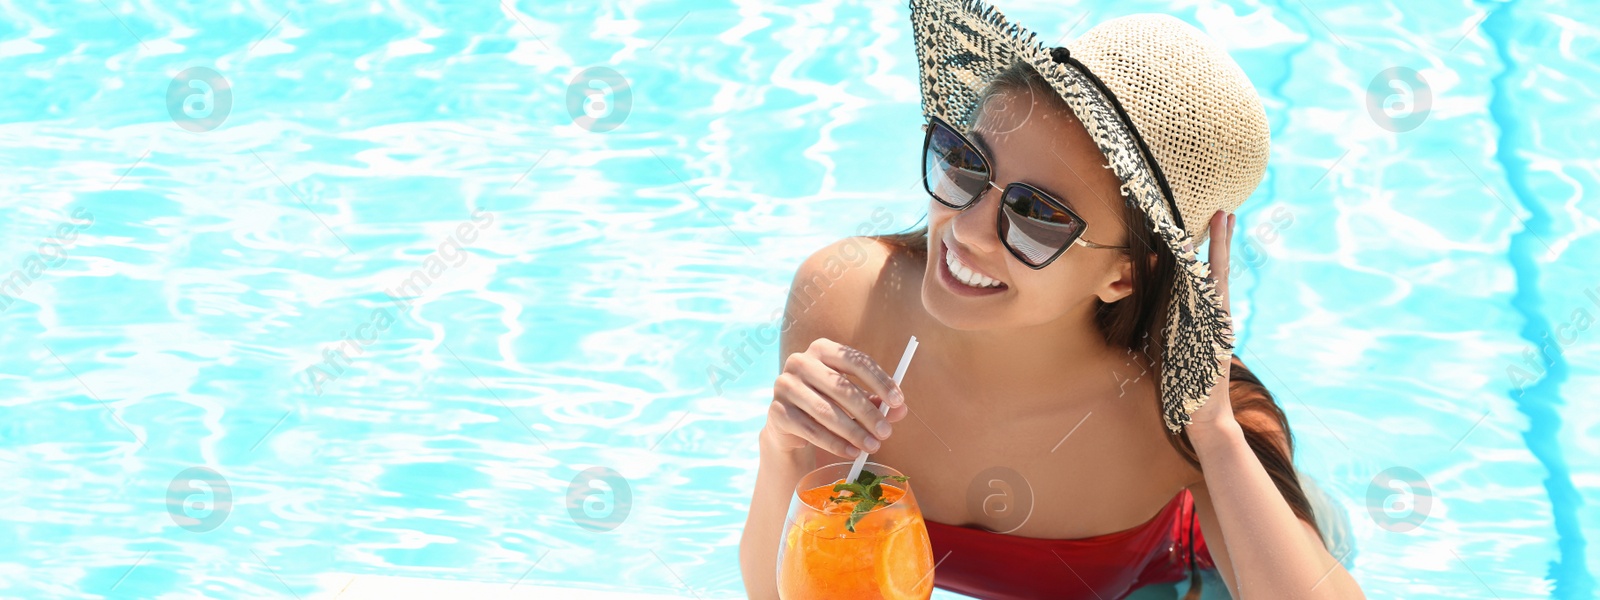 Image of Woman with glass of refreshing drink in swimming pool on sunny day, banner design